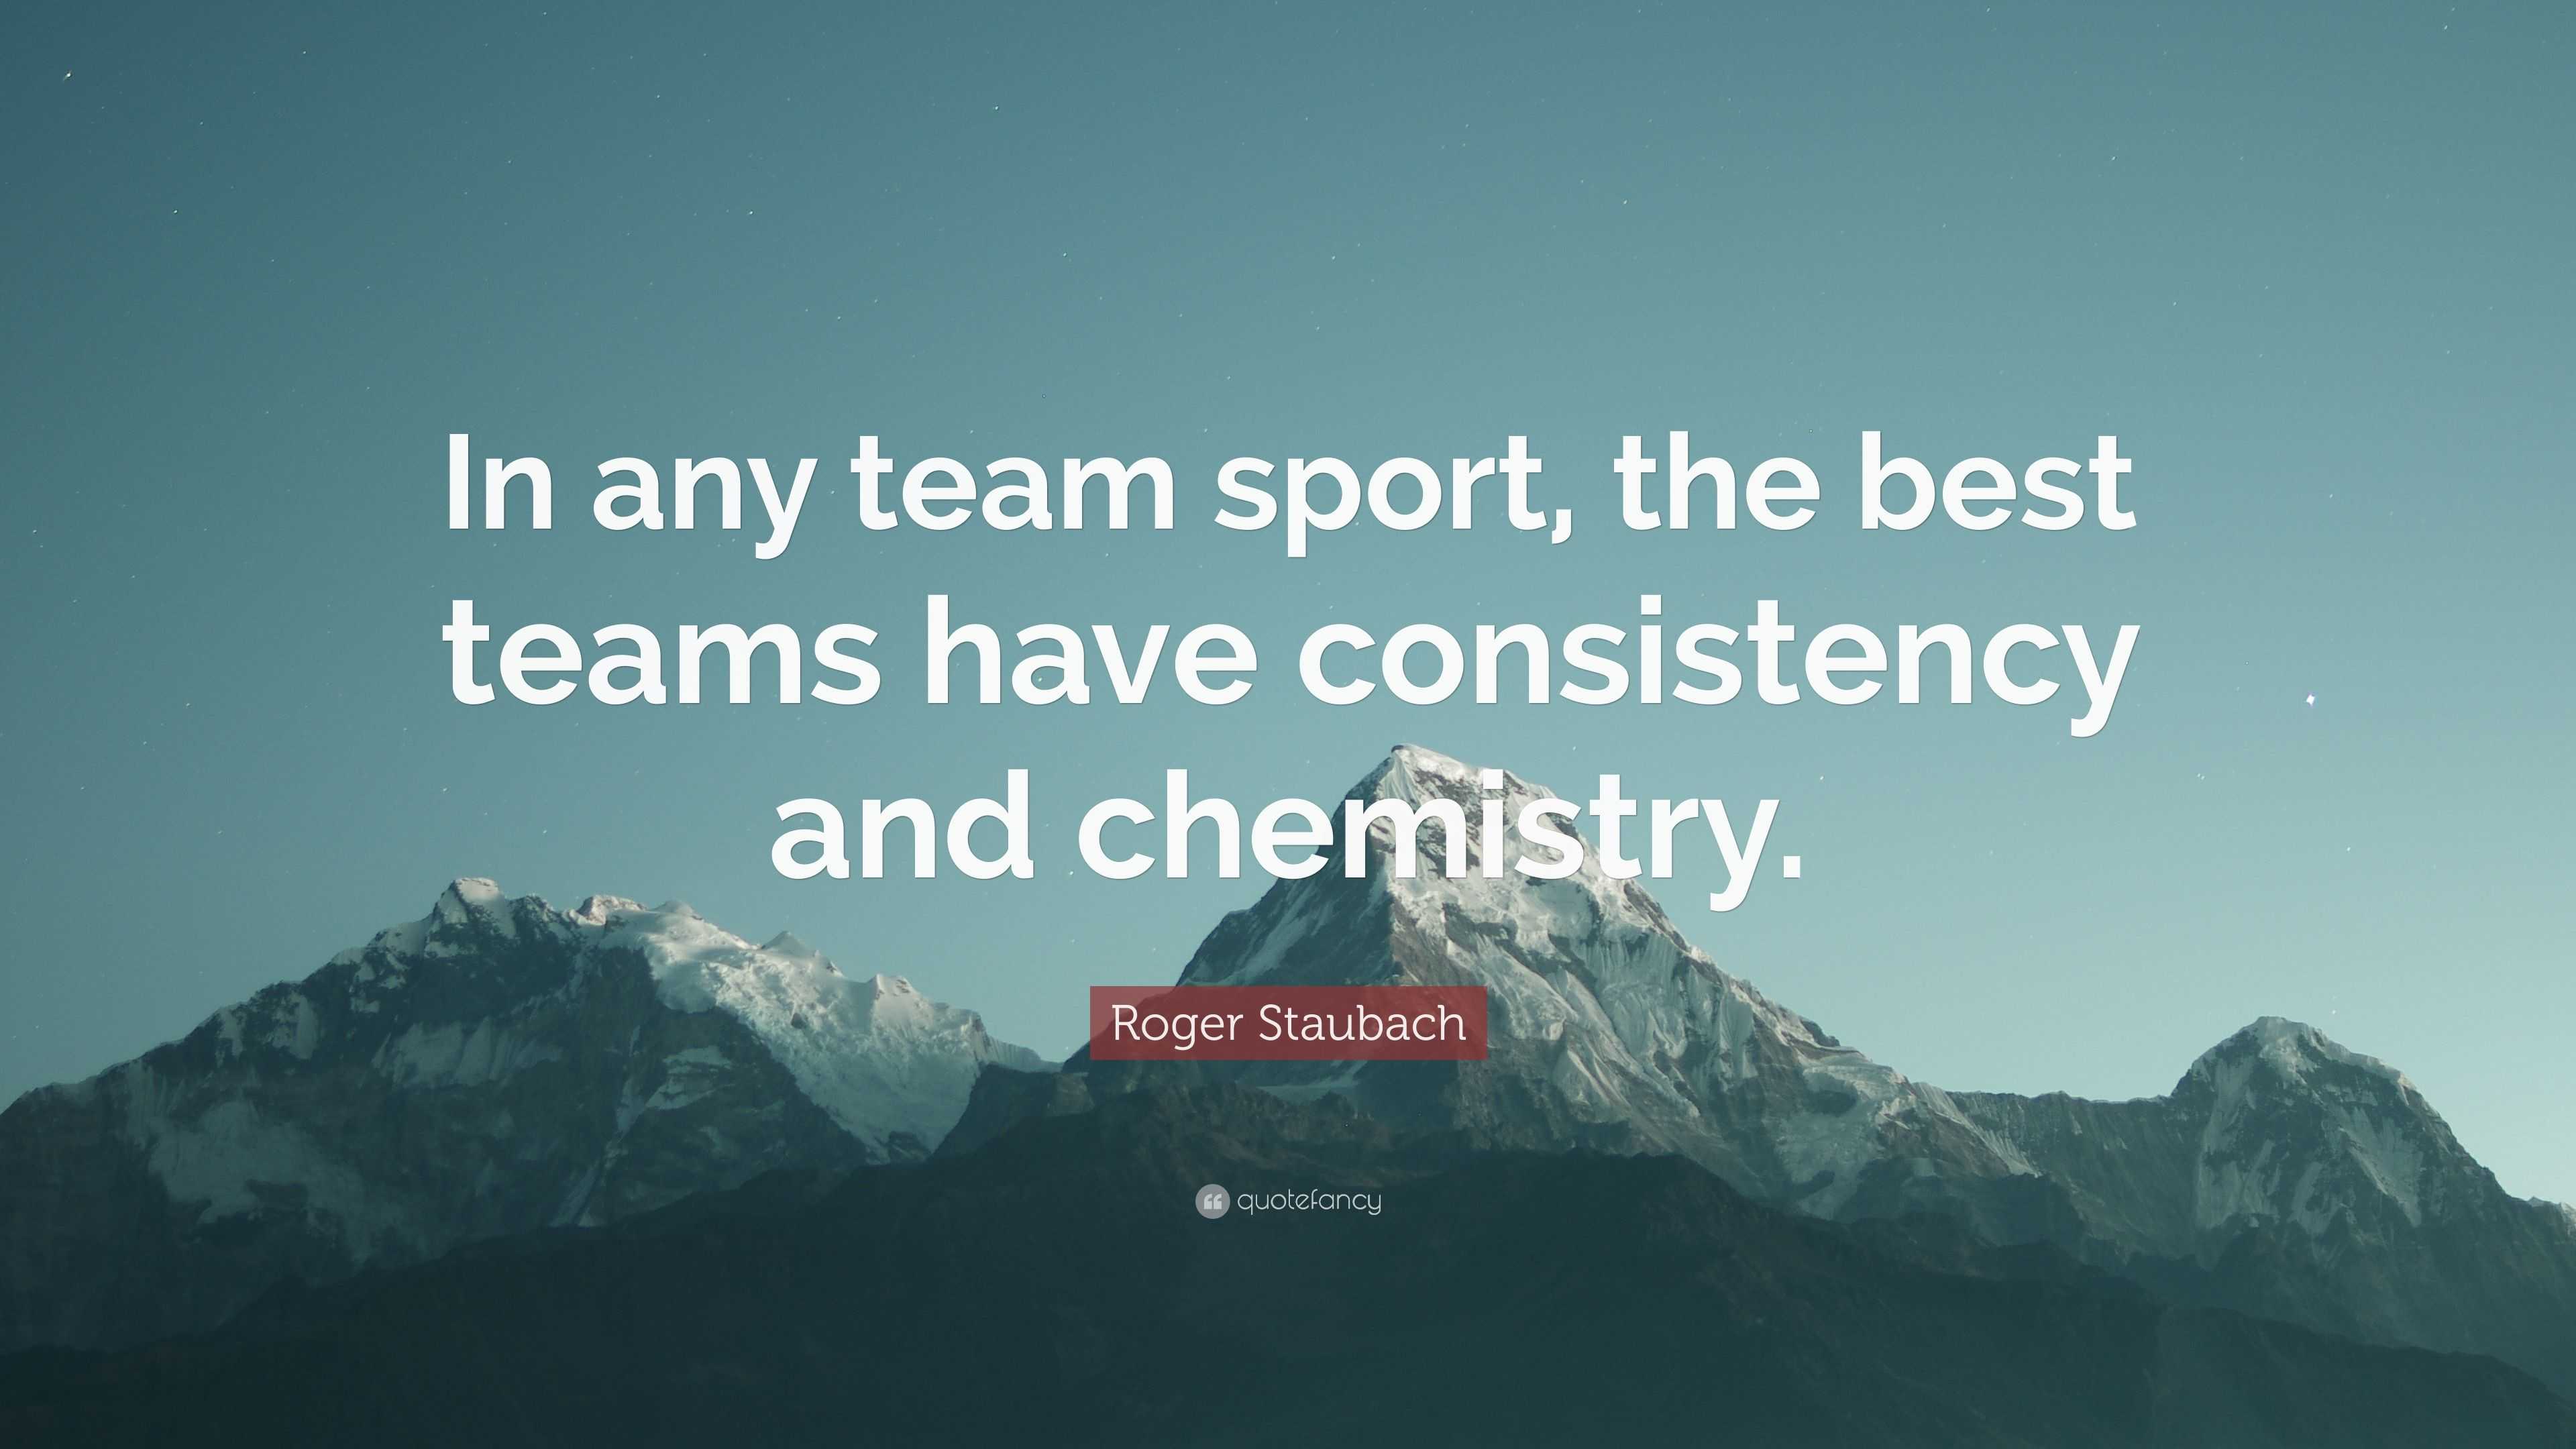 Roger Staubach Quote: “In any team sport, the best teams have ...